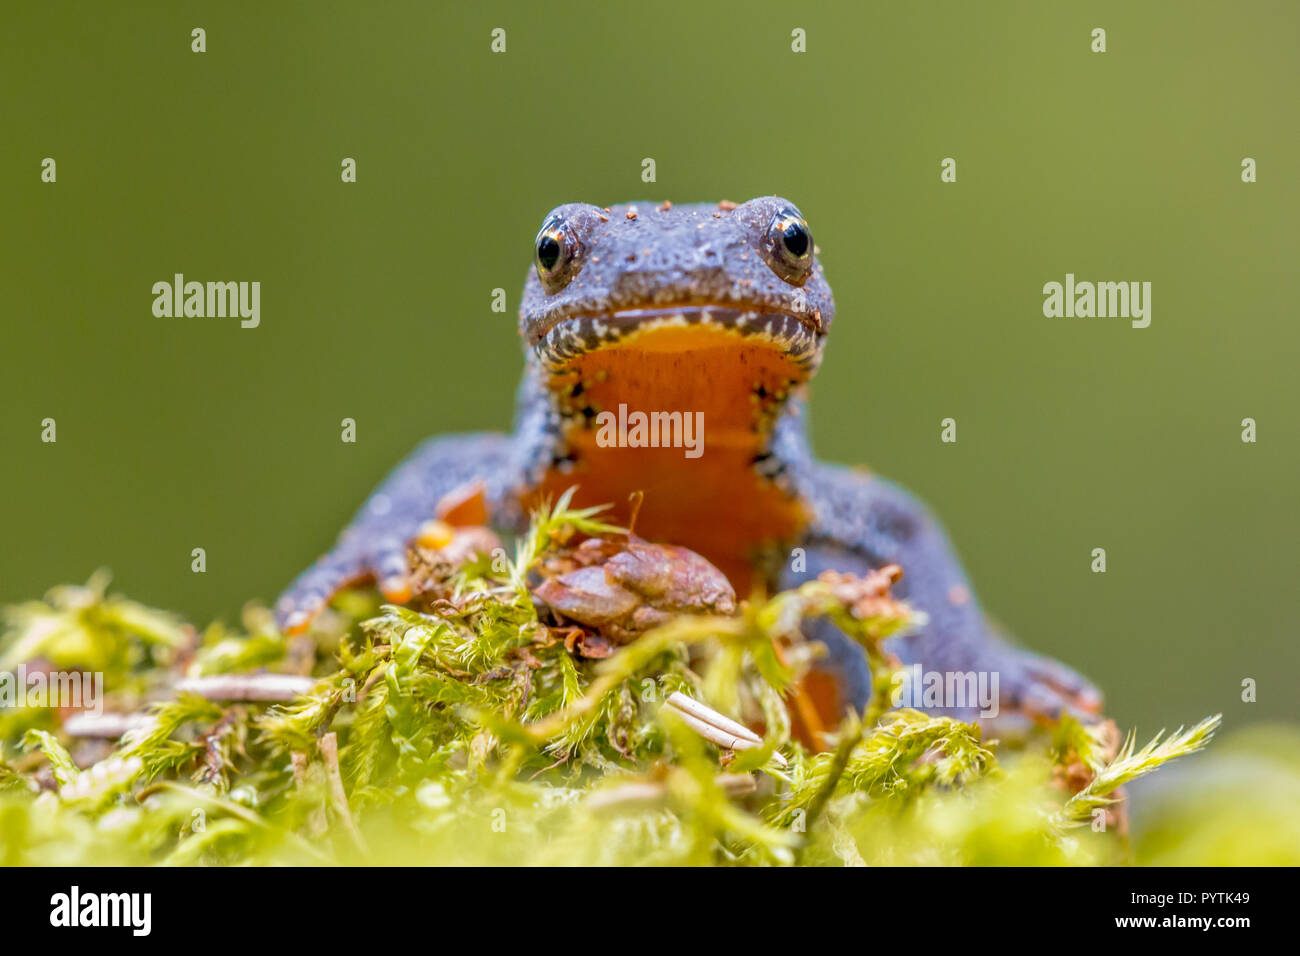 Frontal portrait of alpine newt (Ichthyosaura alpestris) looking straight in the camera with green background Stock Photo